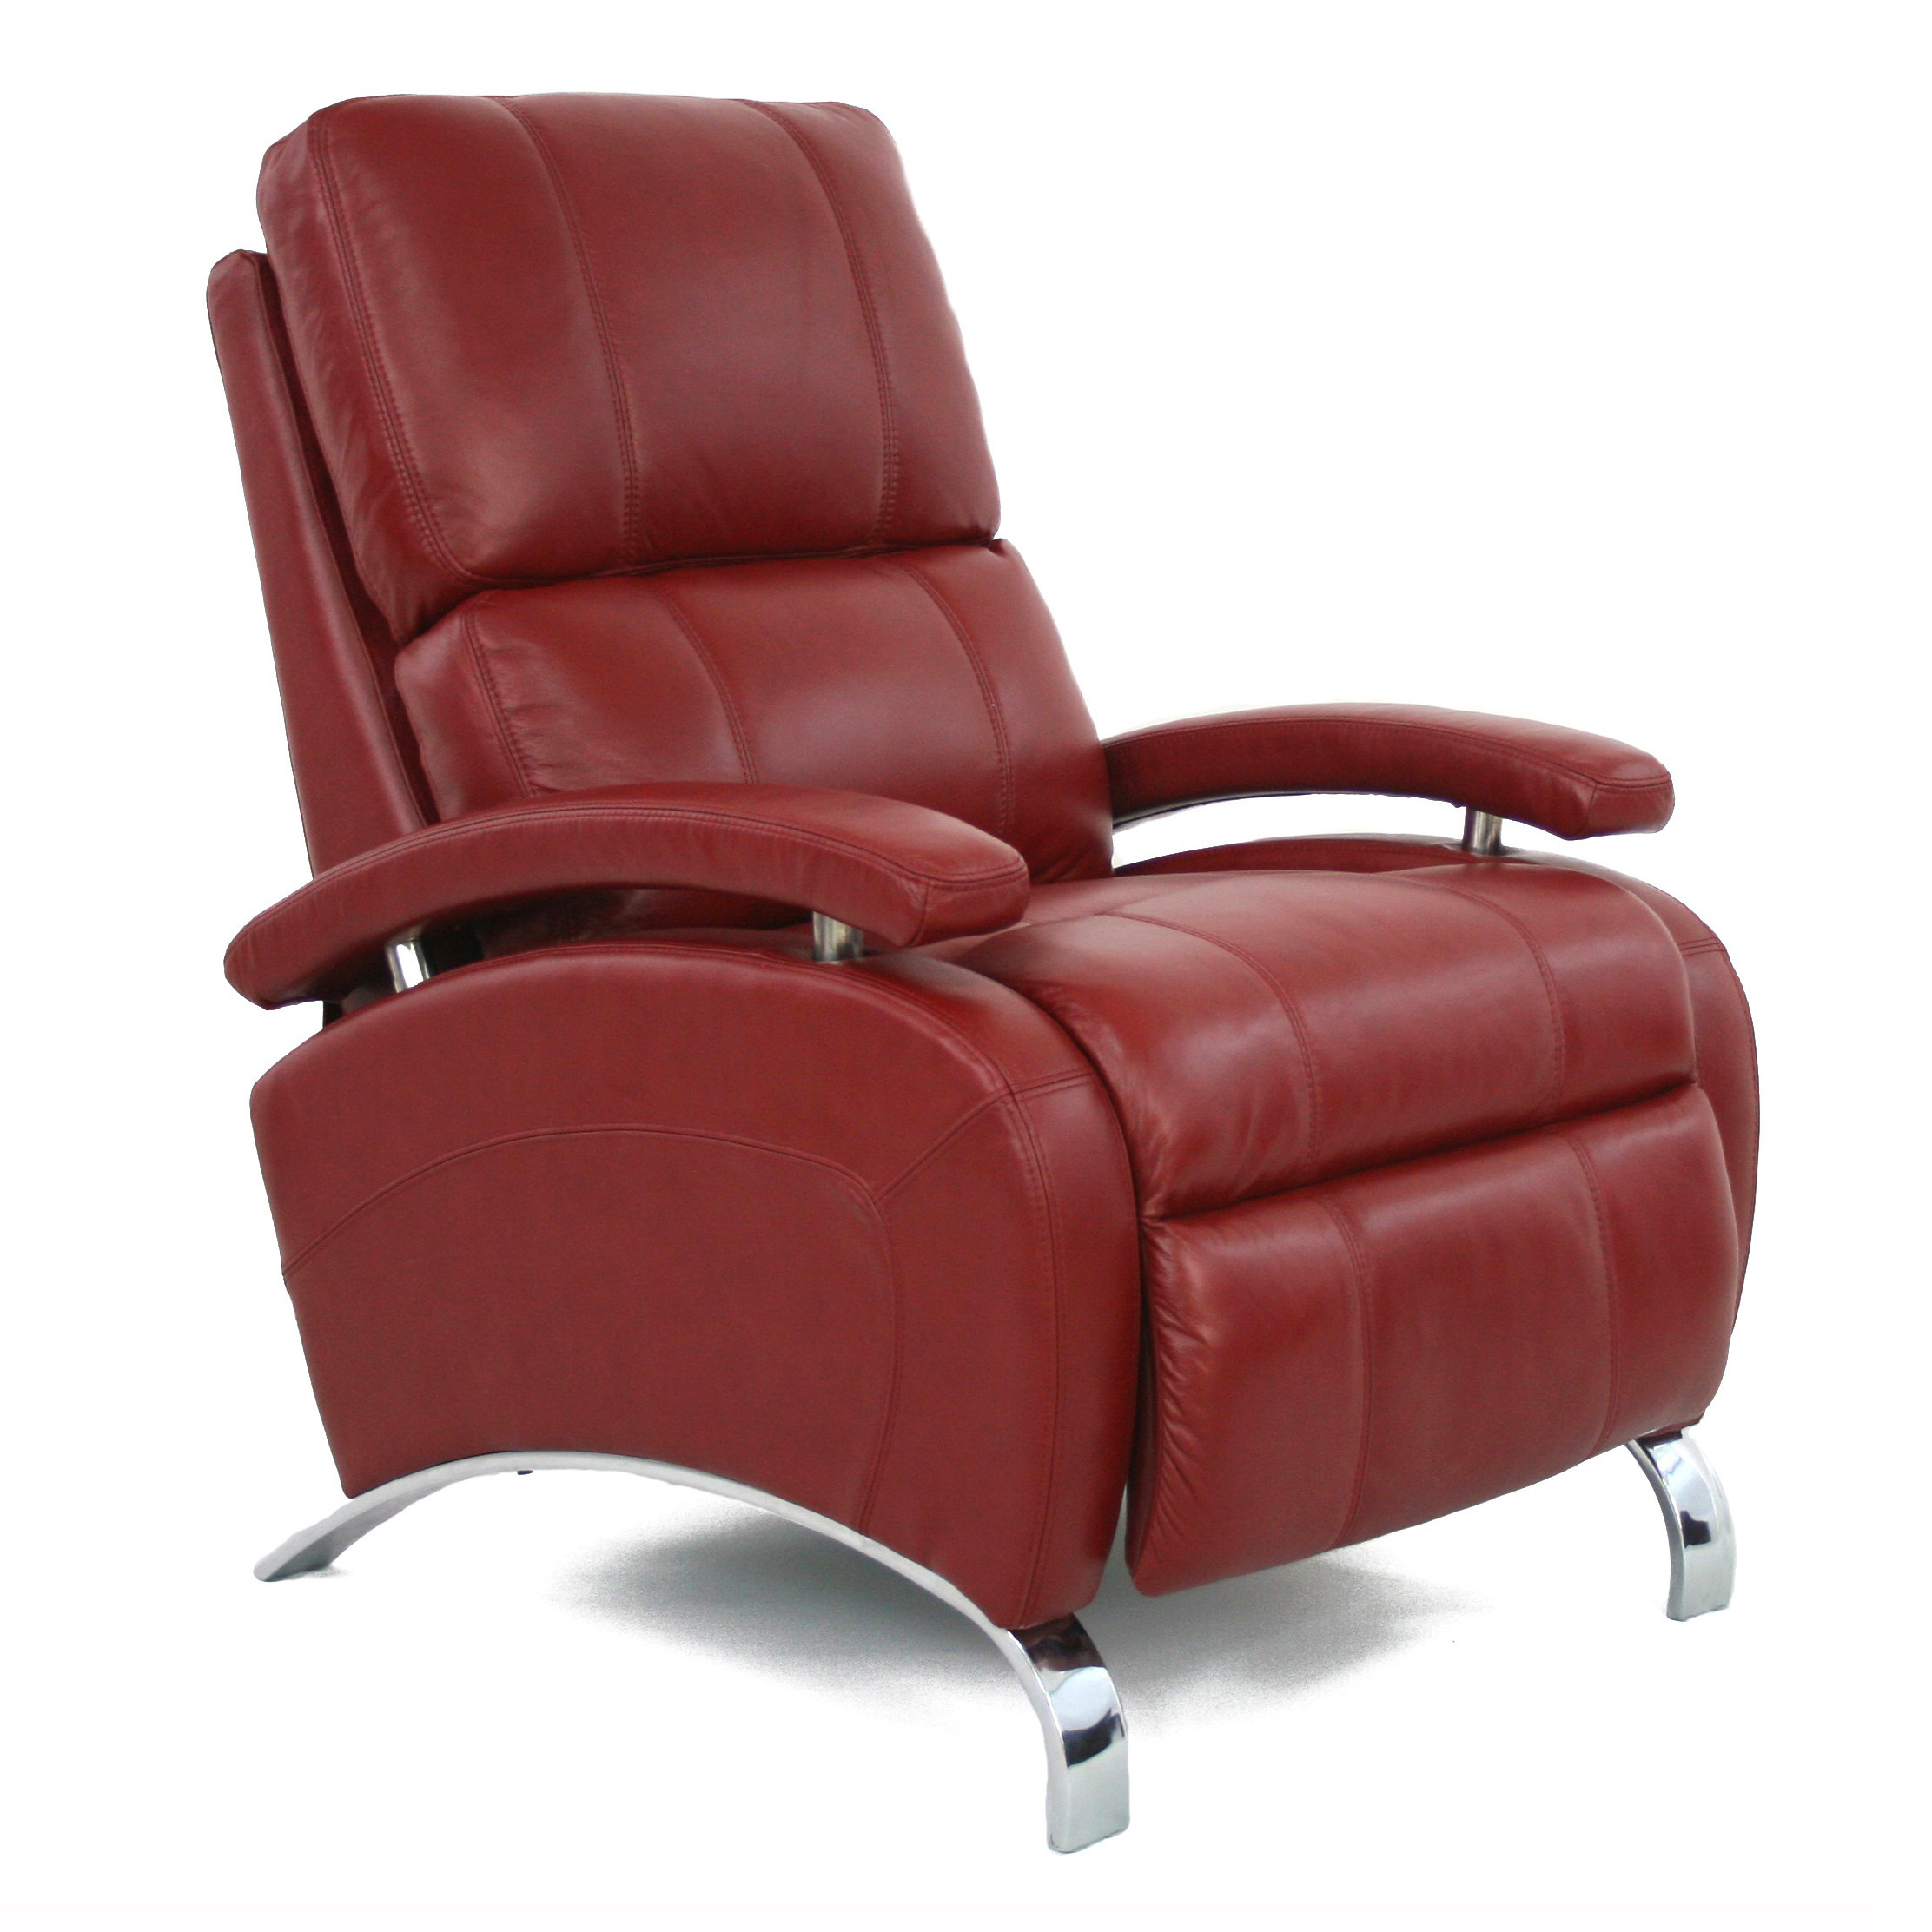 Barcalounger leather recliner 1